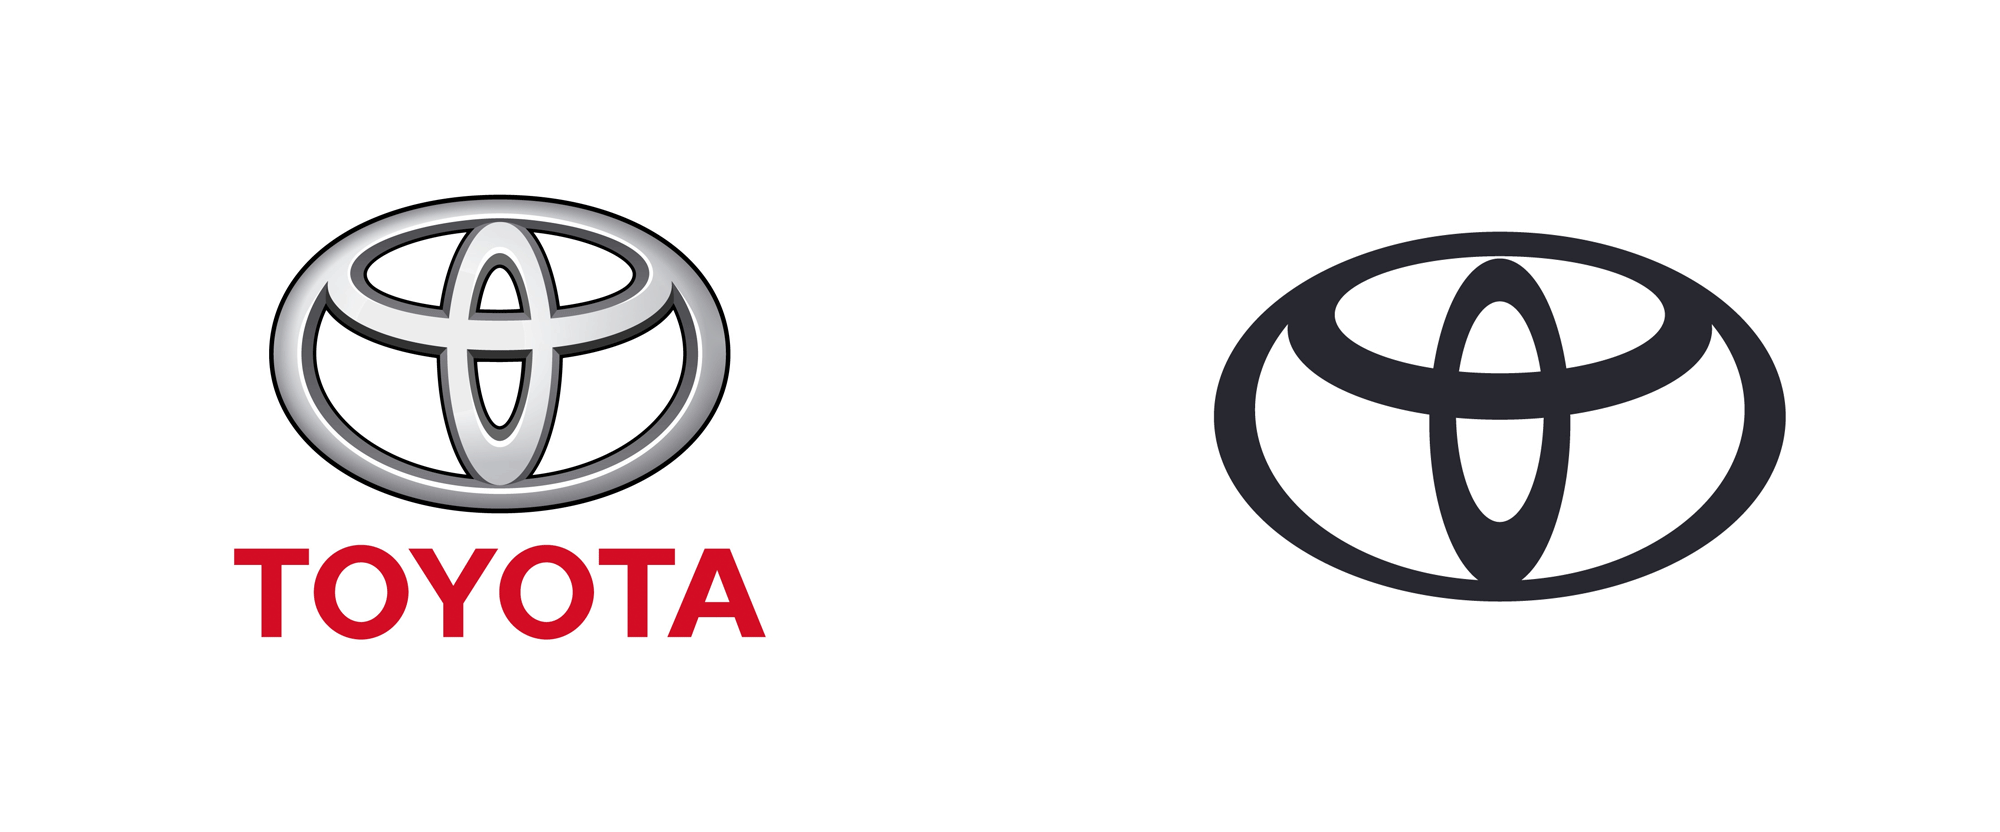 New Logo and Identity for Toyota Europe by The&Partnership